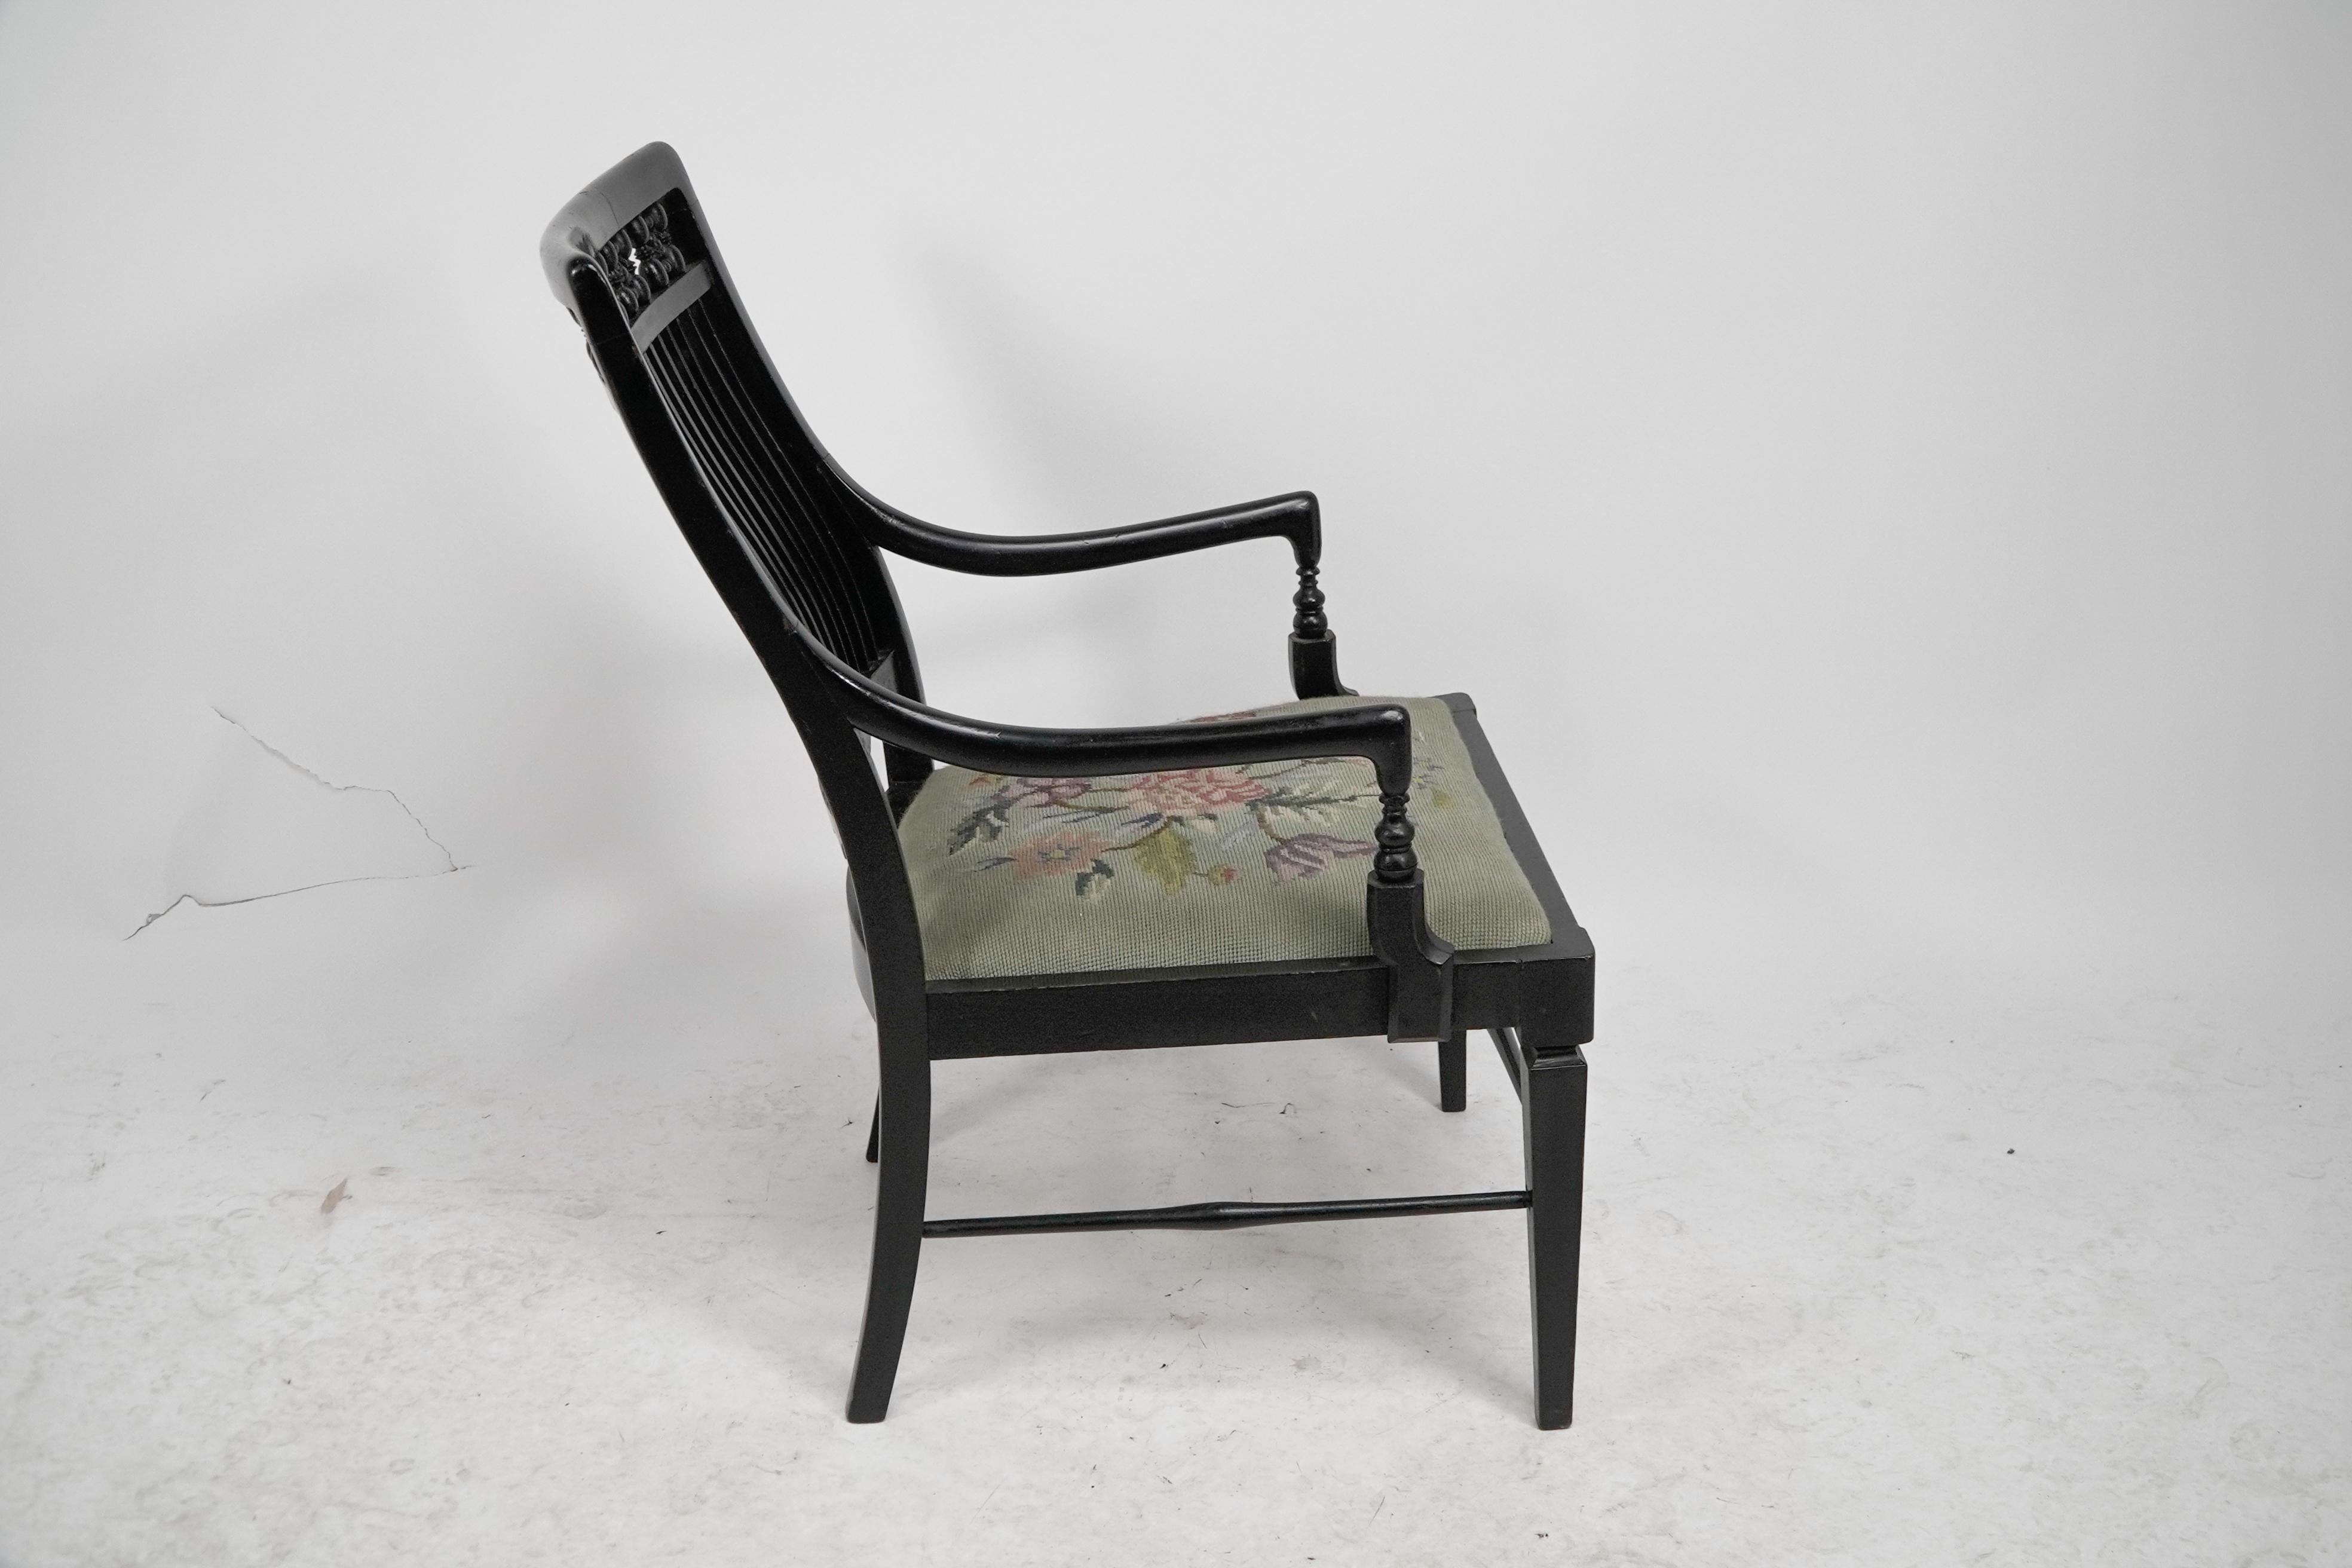 Late 19th Century Liberty & Co armchair with a shaped back & mashrabiya turnings to the head rest. For Sale